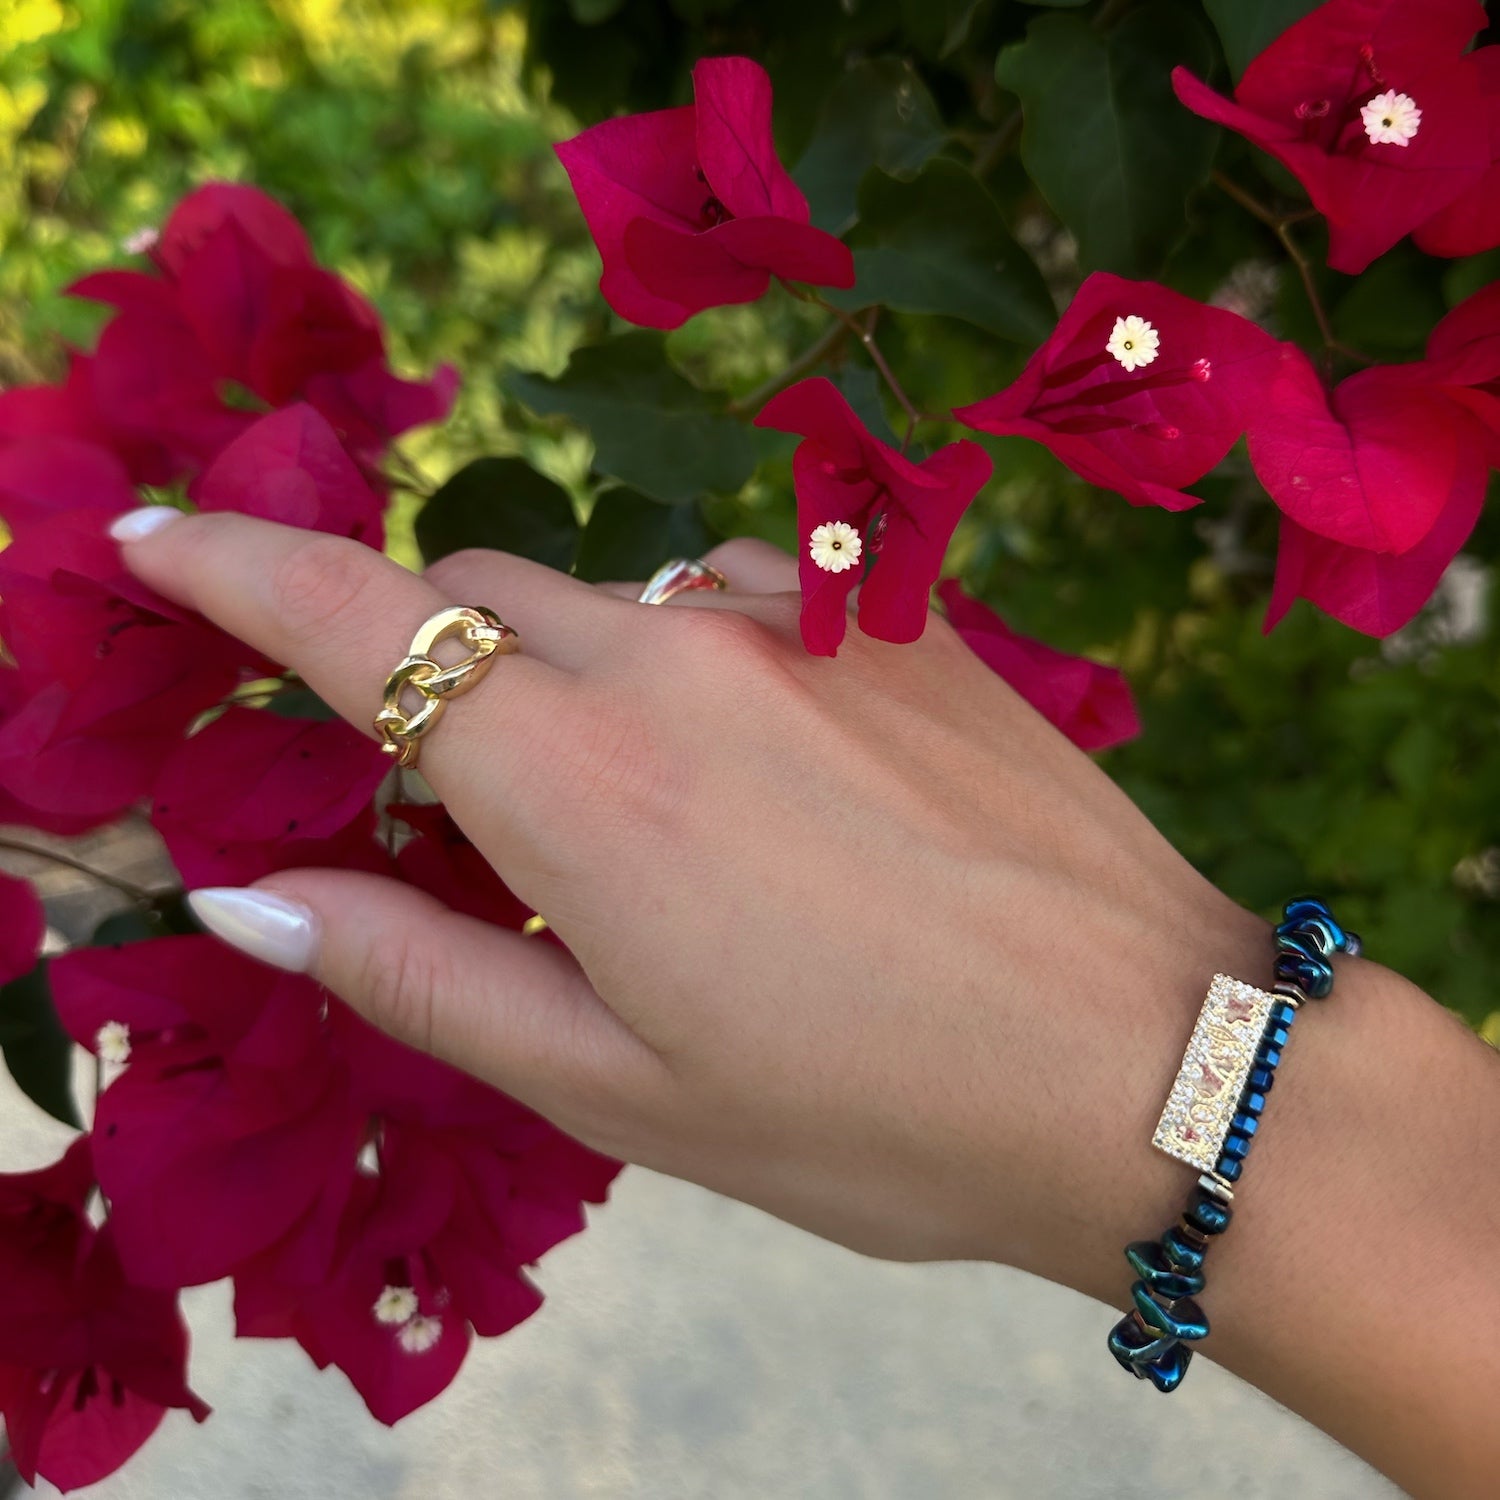 The hand model showcases the elegance and symbolism of the Protection &amp; Luck Blue Hematite Bracelet, radiating confidence and positive energy.